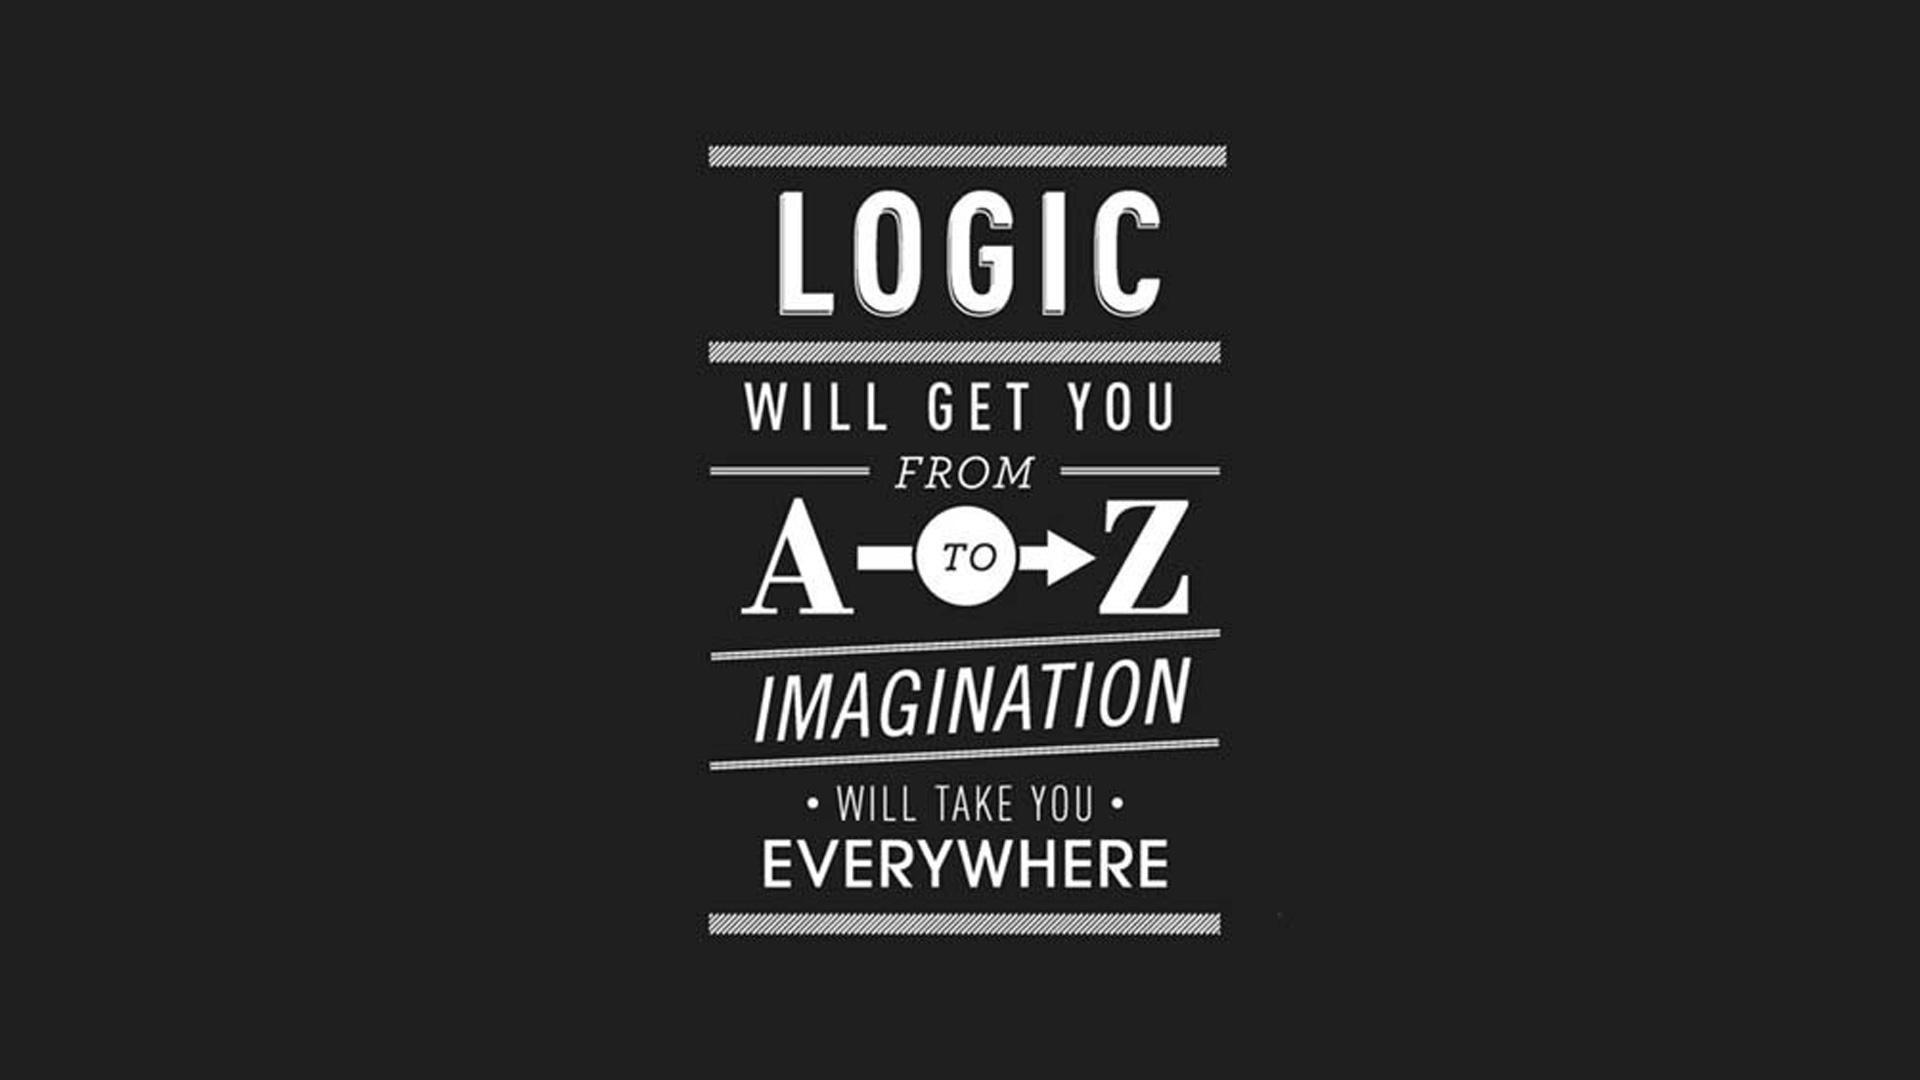 11 Awesome And Meaningful Logic Quotes